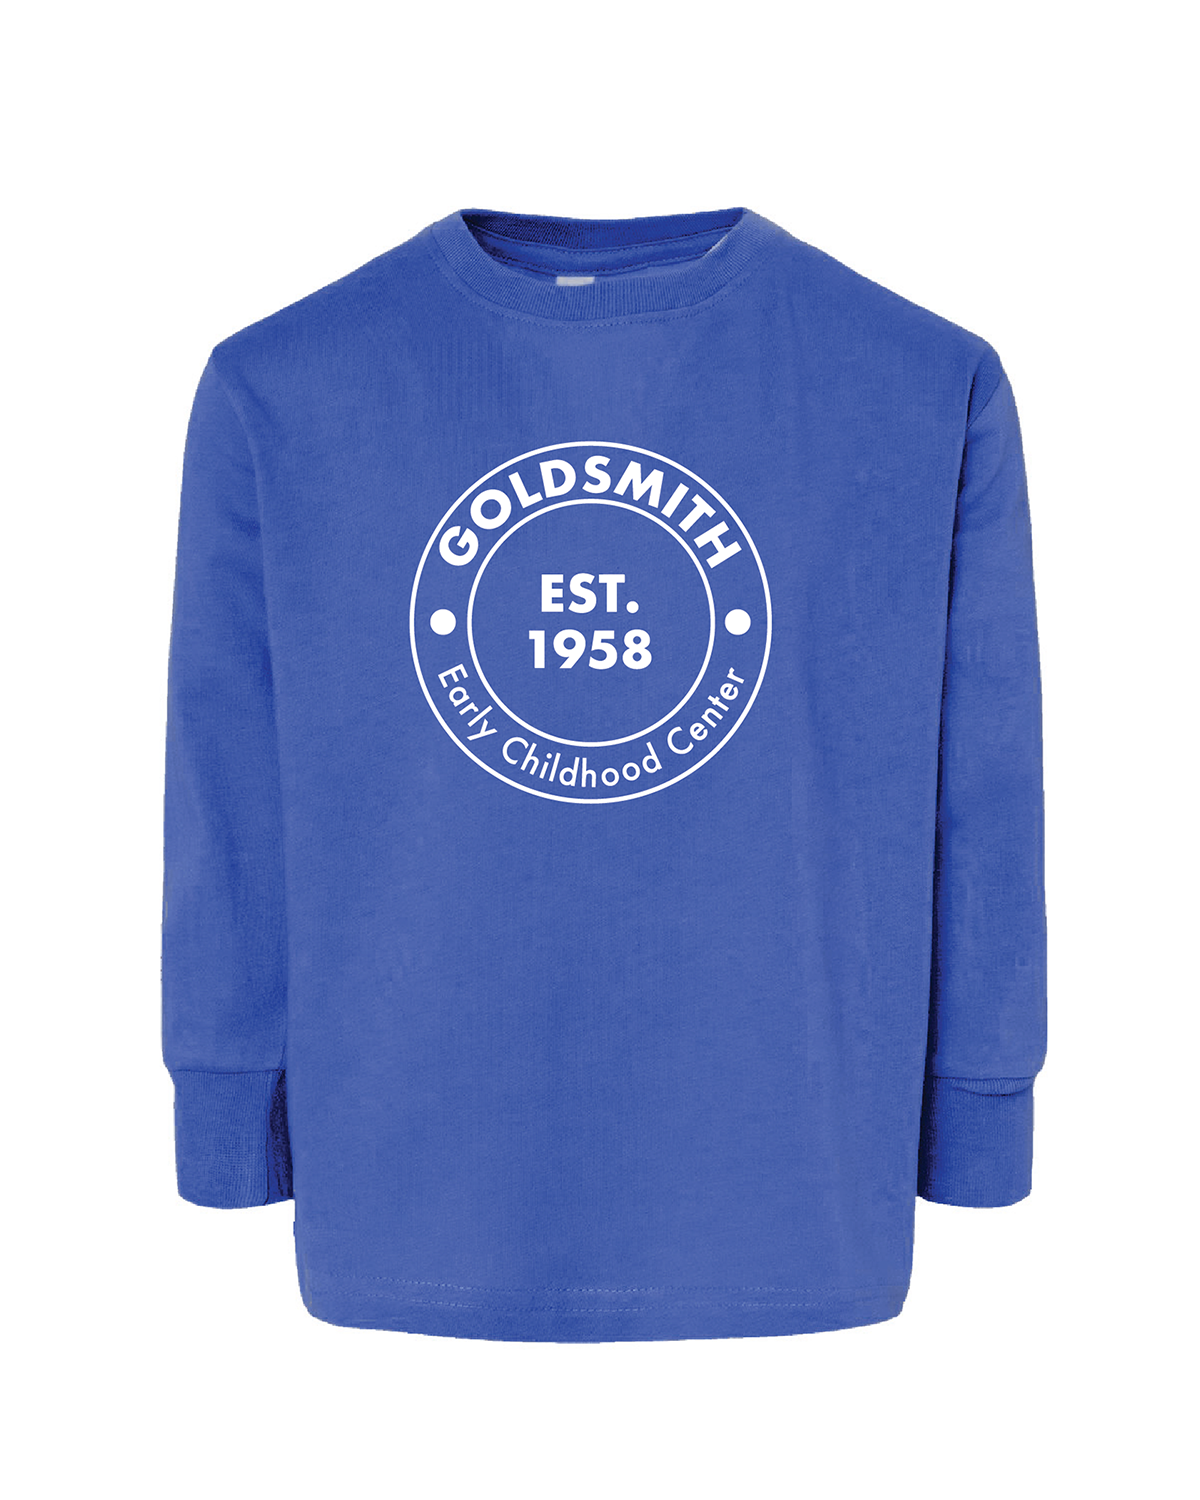 Toddler Fine Jersey Long Sleeved Tee with Round Logo